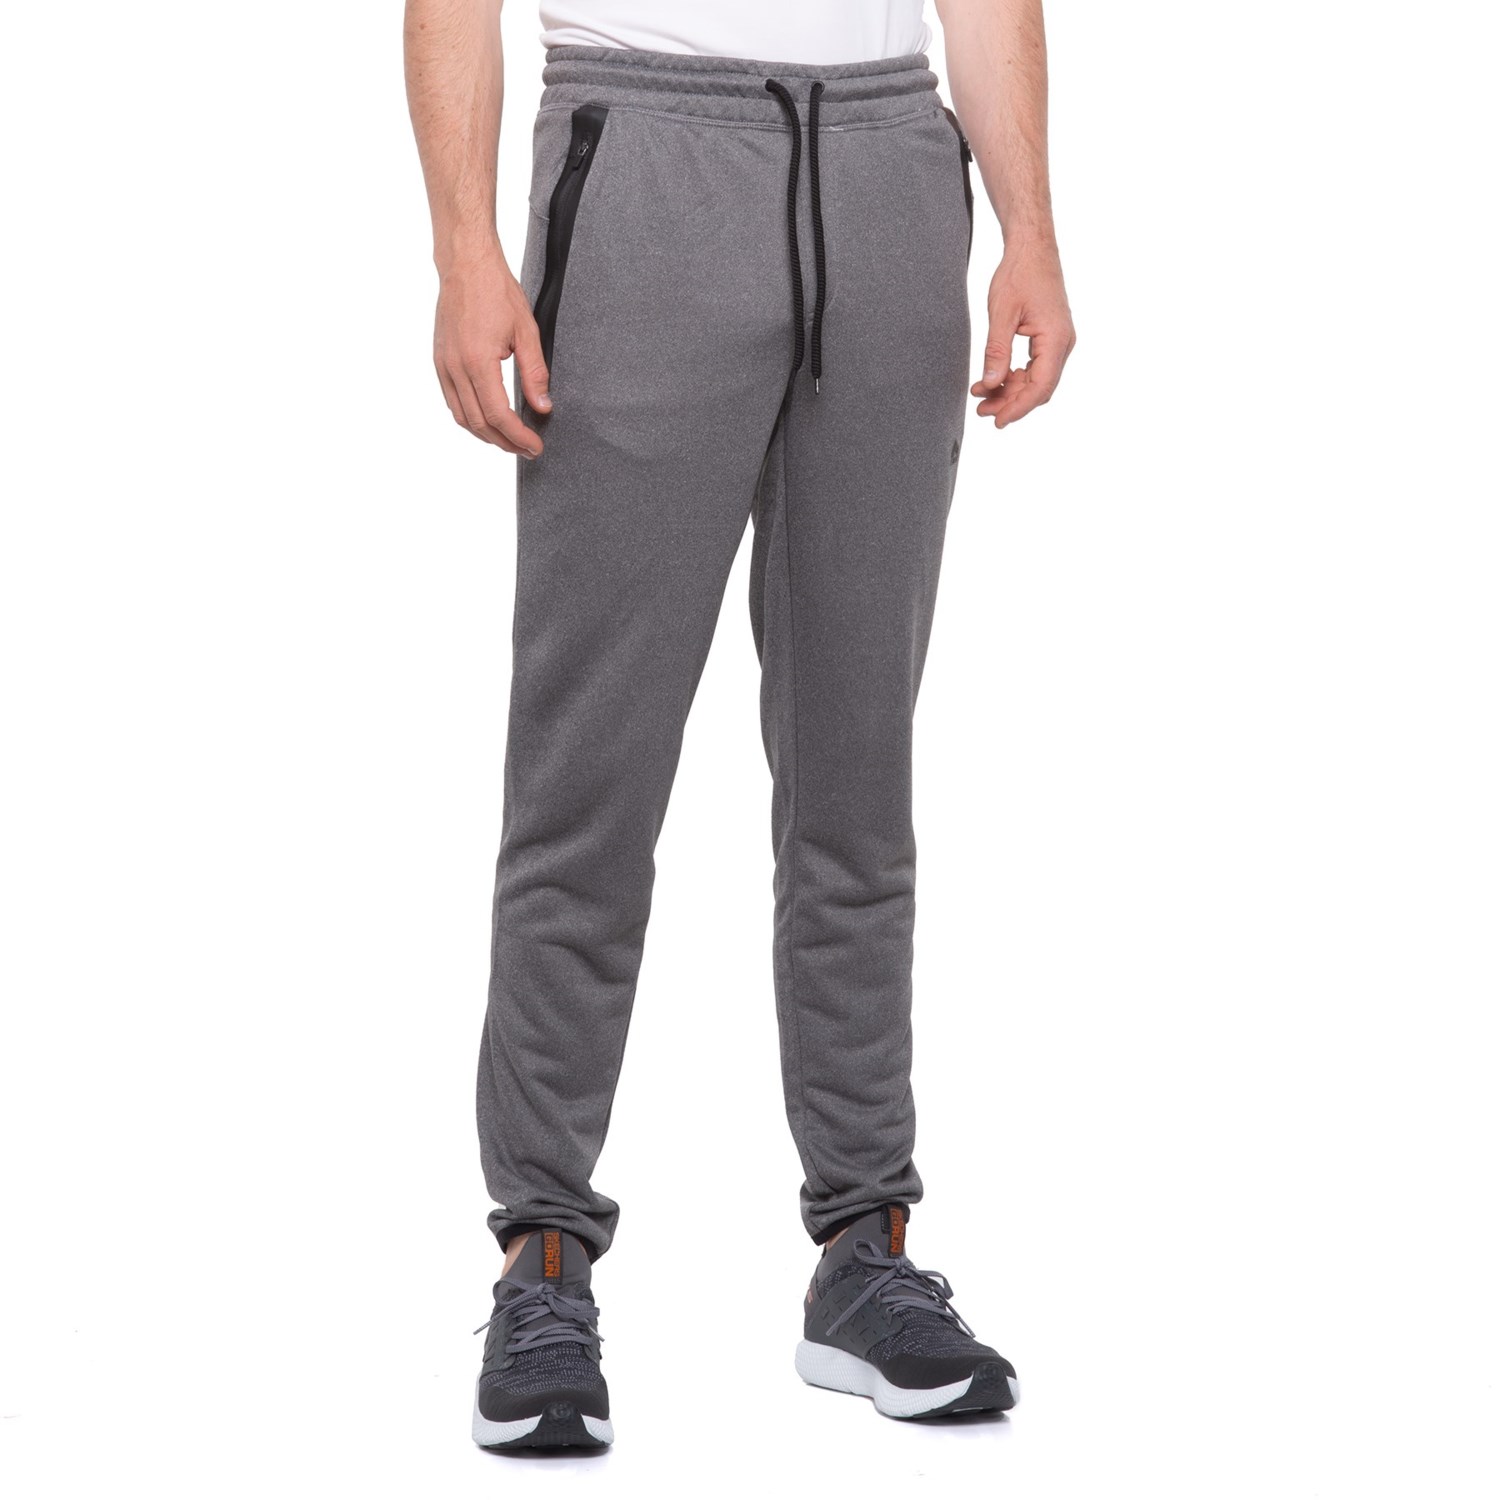 RBX French Terry Joggers (For Men) - Save 25%